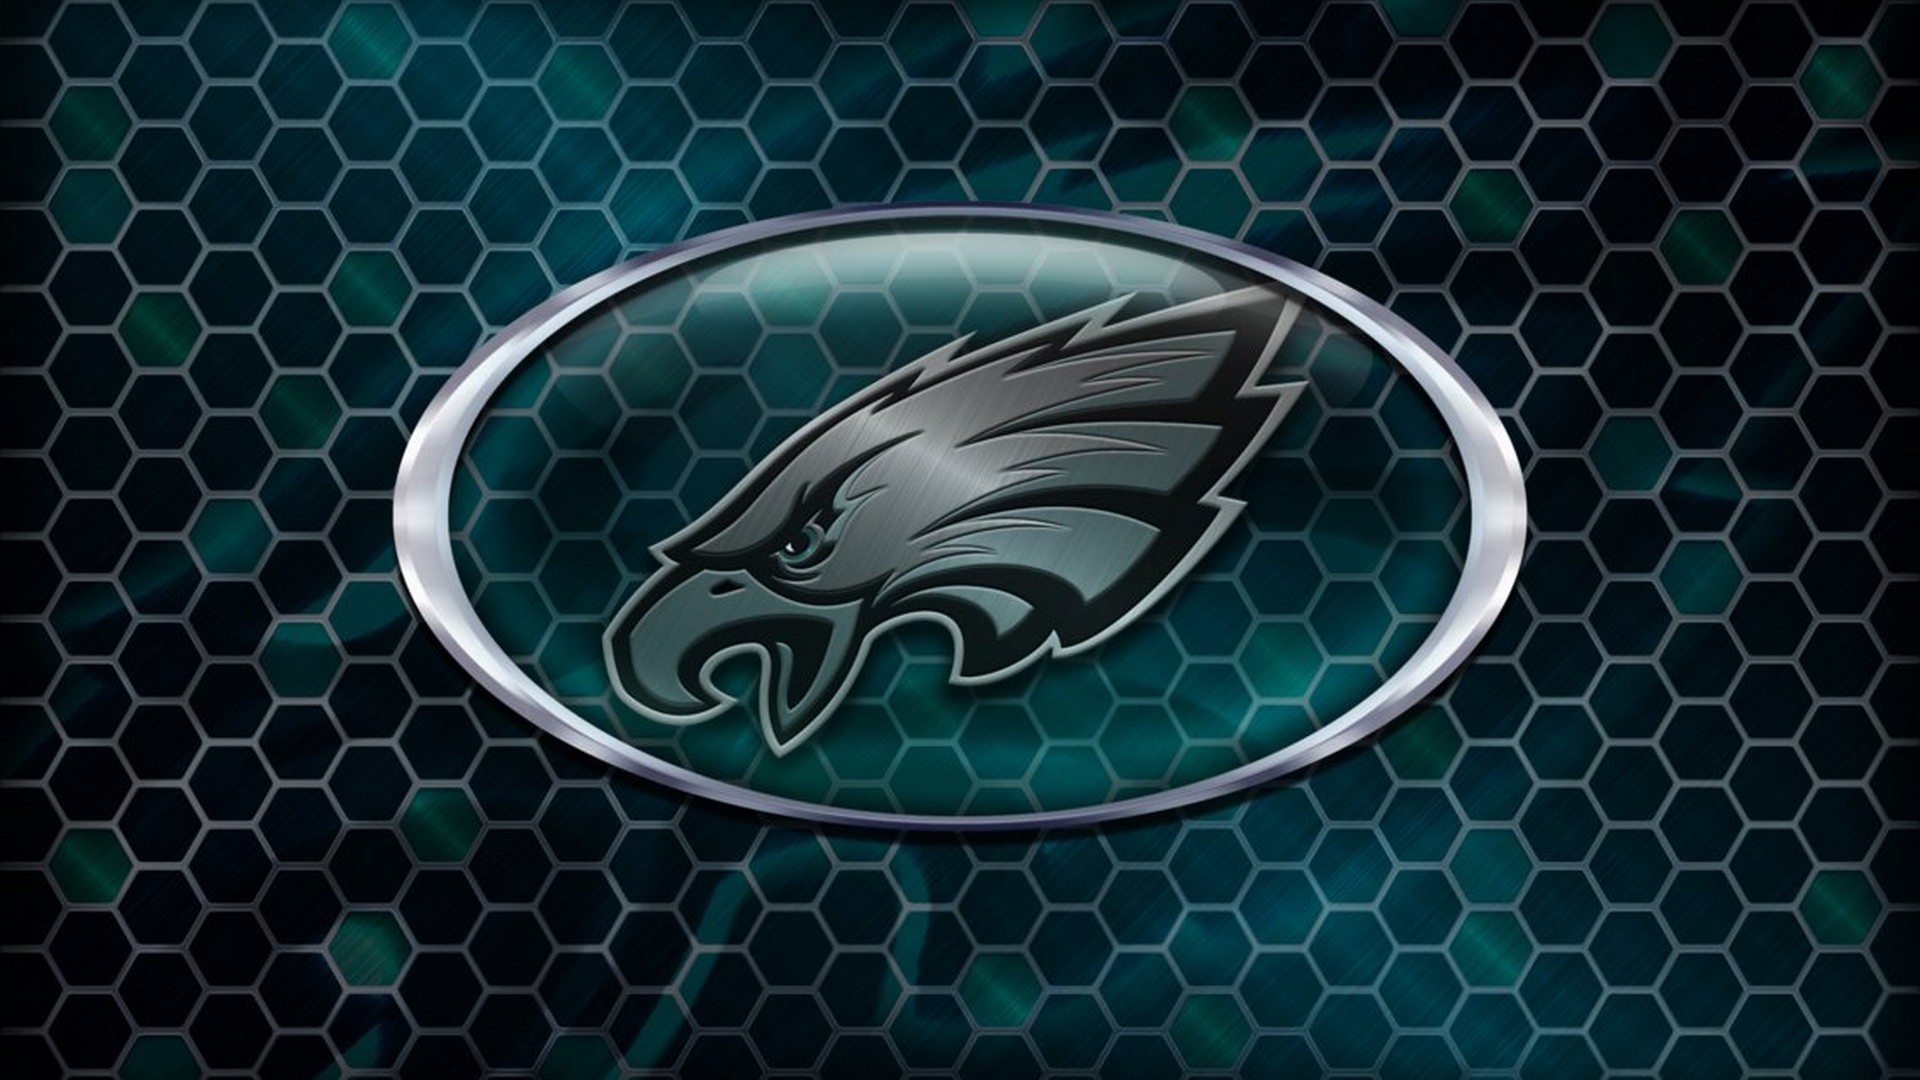 Eagles Football HD Wallpapers With Resolution 1920X1080 pixel. You can make this wallpaper for your Mac or Windows Desktop Background, iPhone, Android or Tablet and another Smartphone device for free